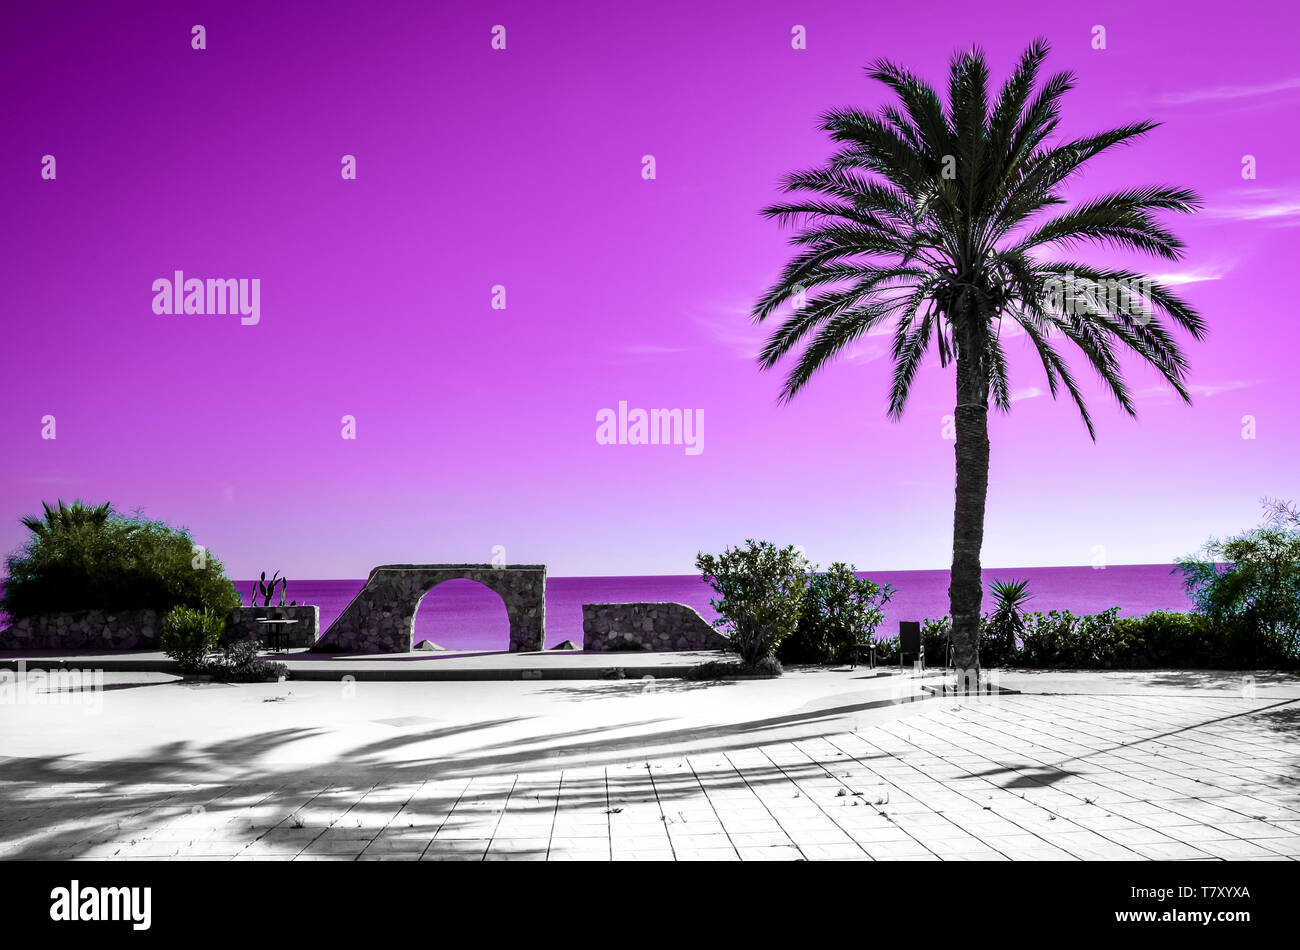 Palm tree silhouette with pink sky and sea in the background. Different kind of wallpaper with gradient colors evoking summer vibes and vacation feelings. Stock Photo